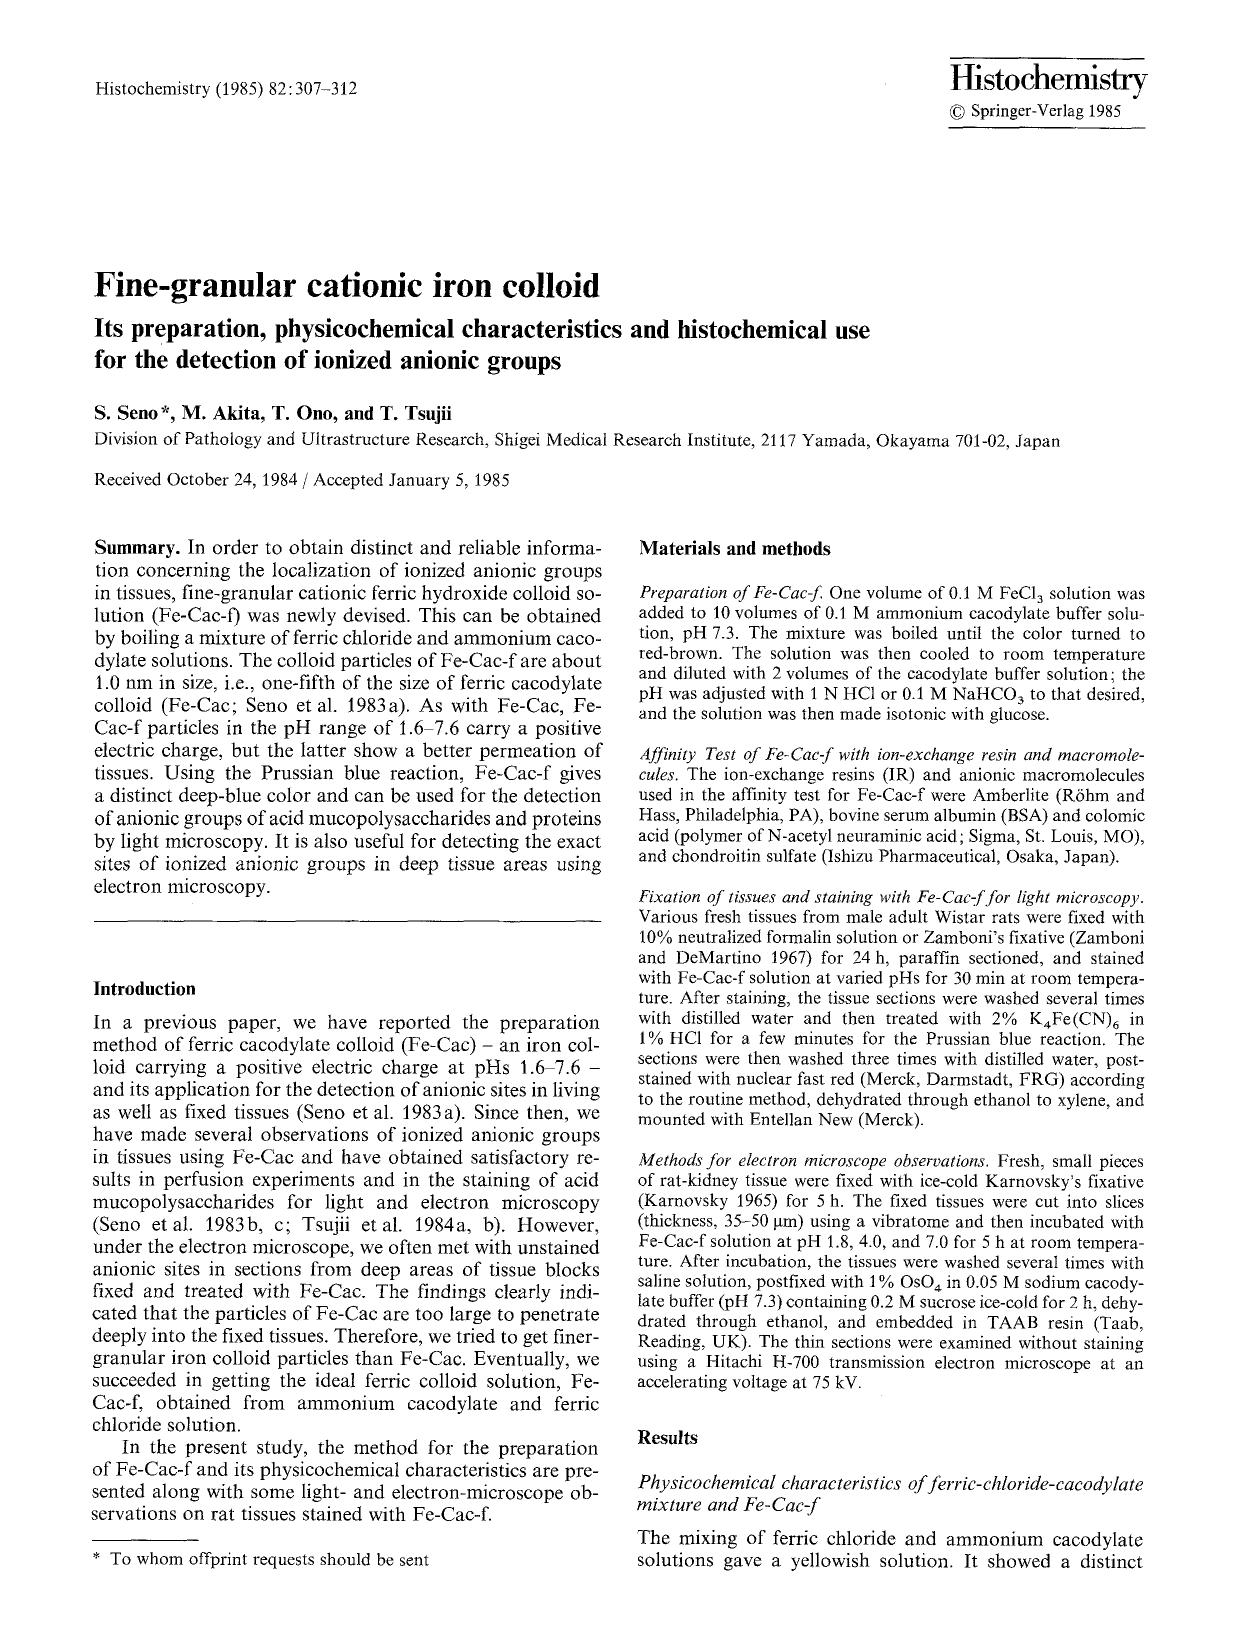 Fine-granular cationic iron colloid by Unknown